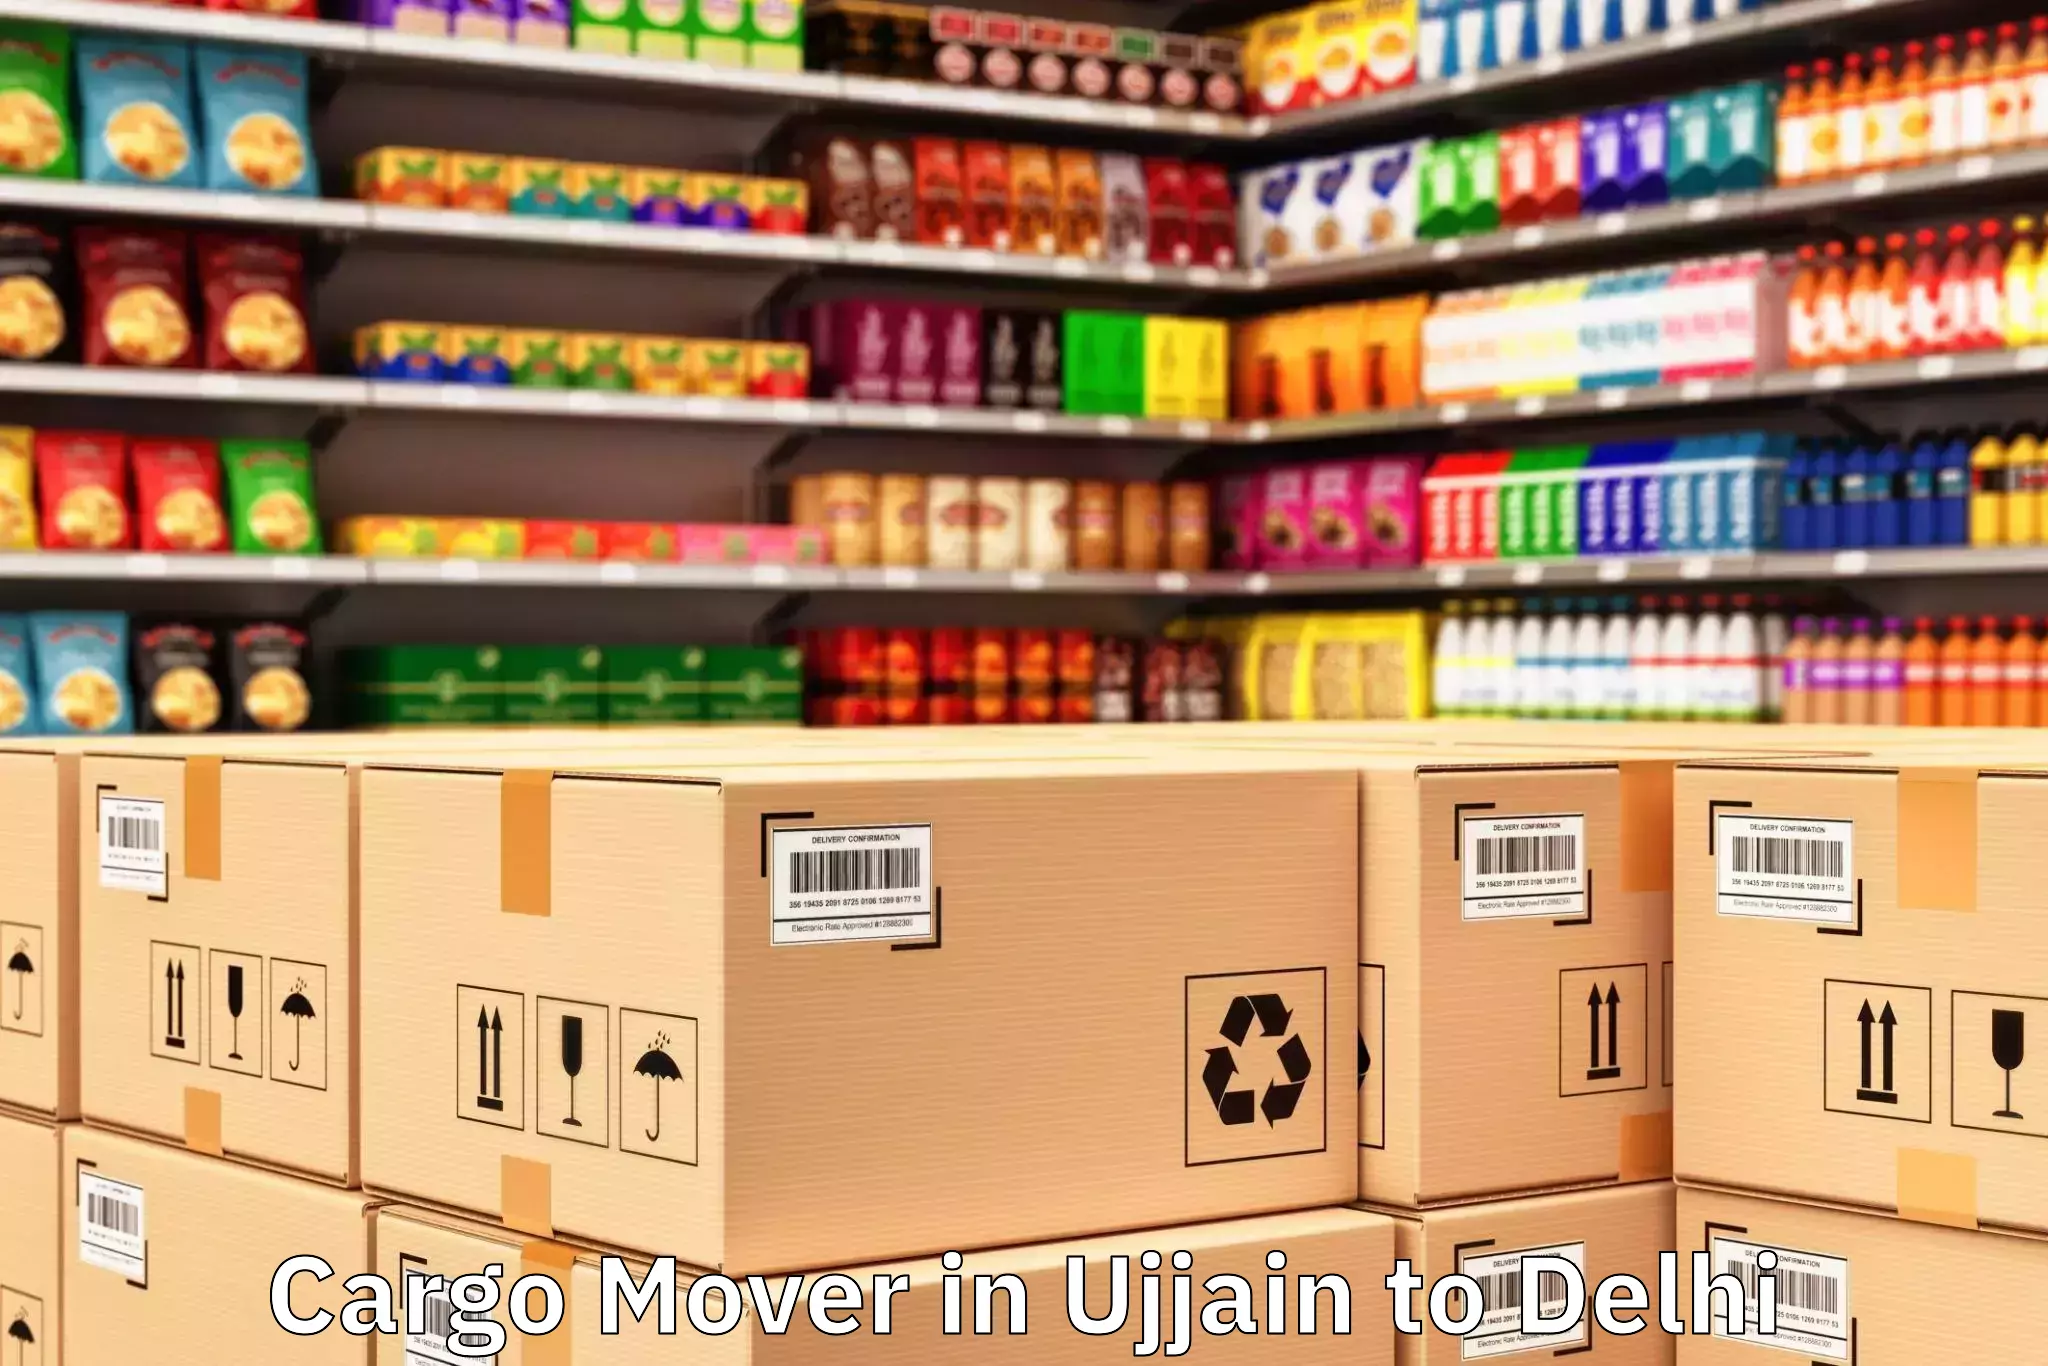 Efficient Ujjain to The Chanakya Mall Cargo Mover